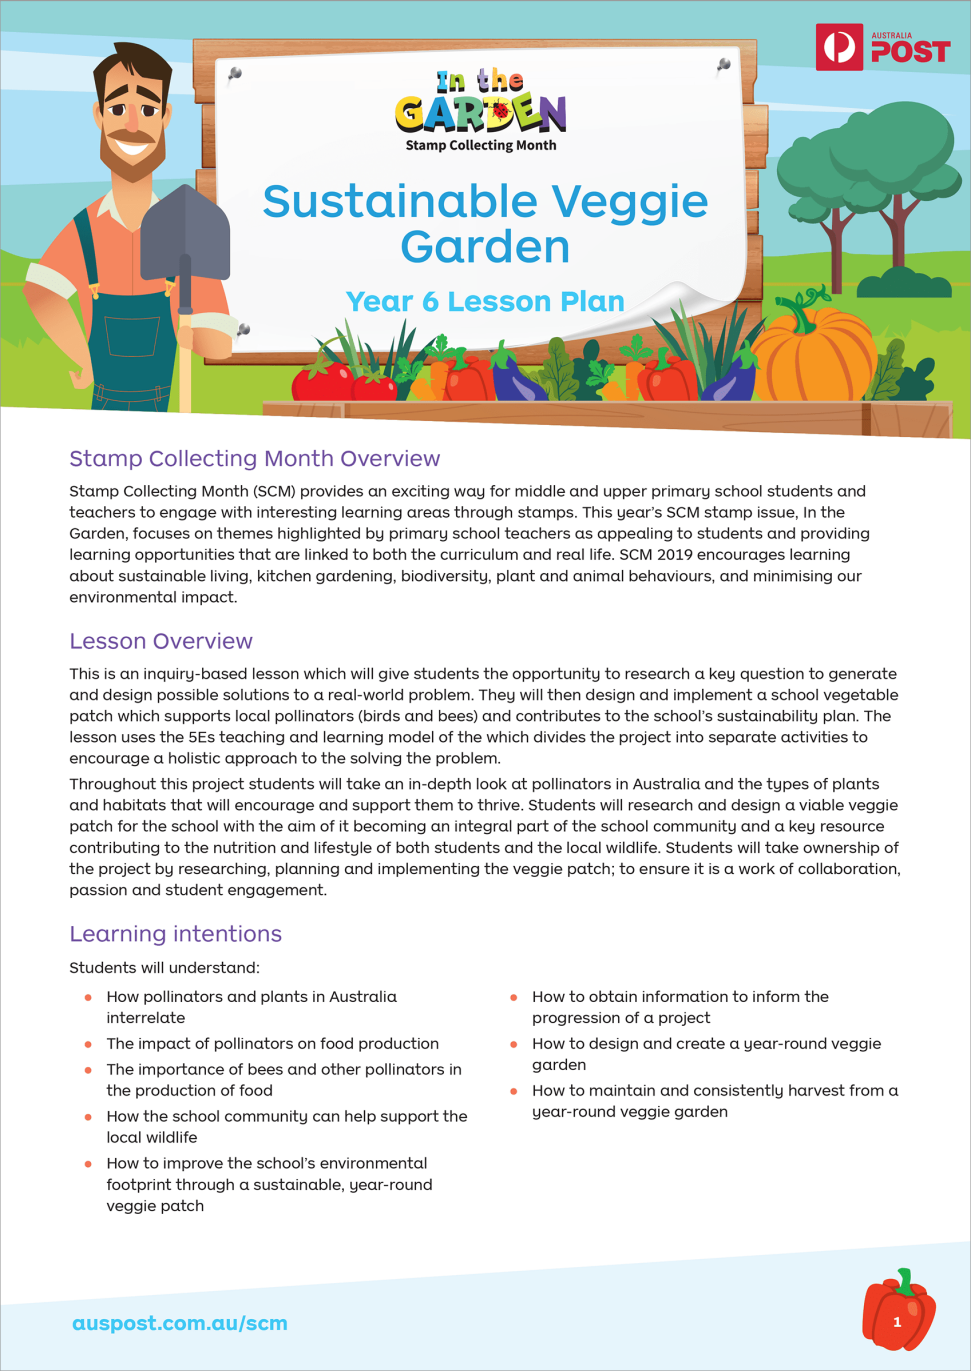 Stamp Collecting Month In the Garden 2019 Lesson Plan Year 6